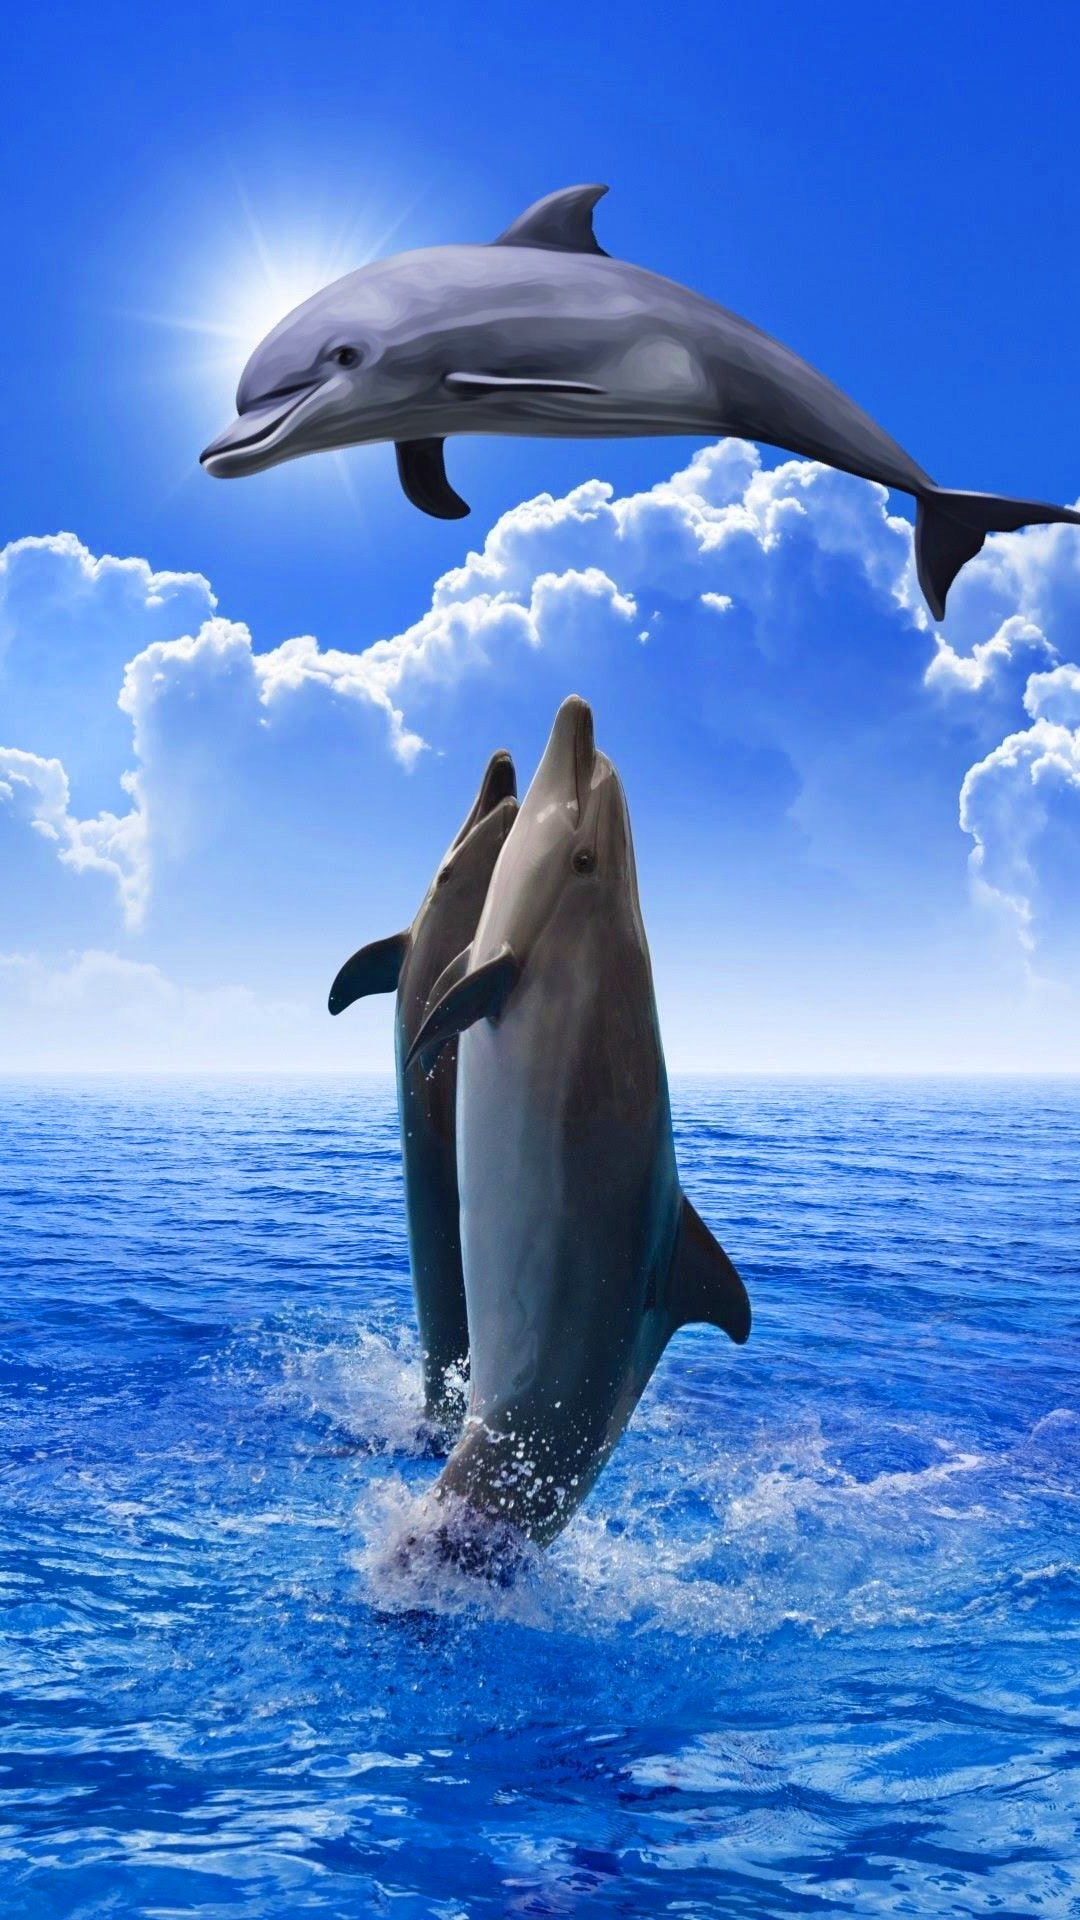 Iphone Dolphin Wallpaper Kolpaper Awesome Free Hd Wallpapers